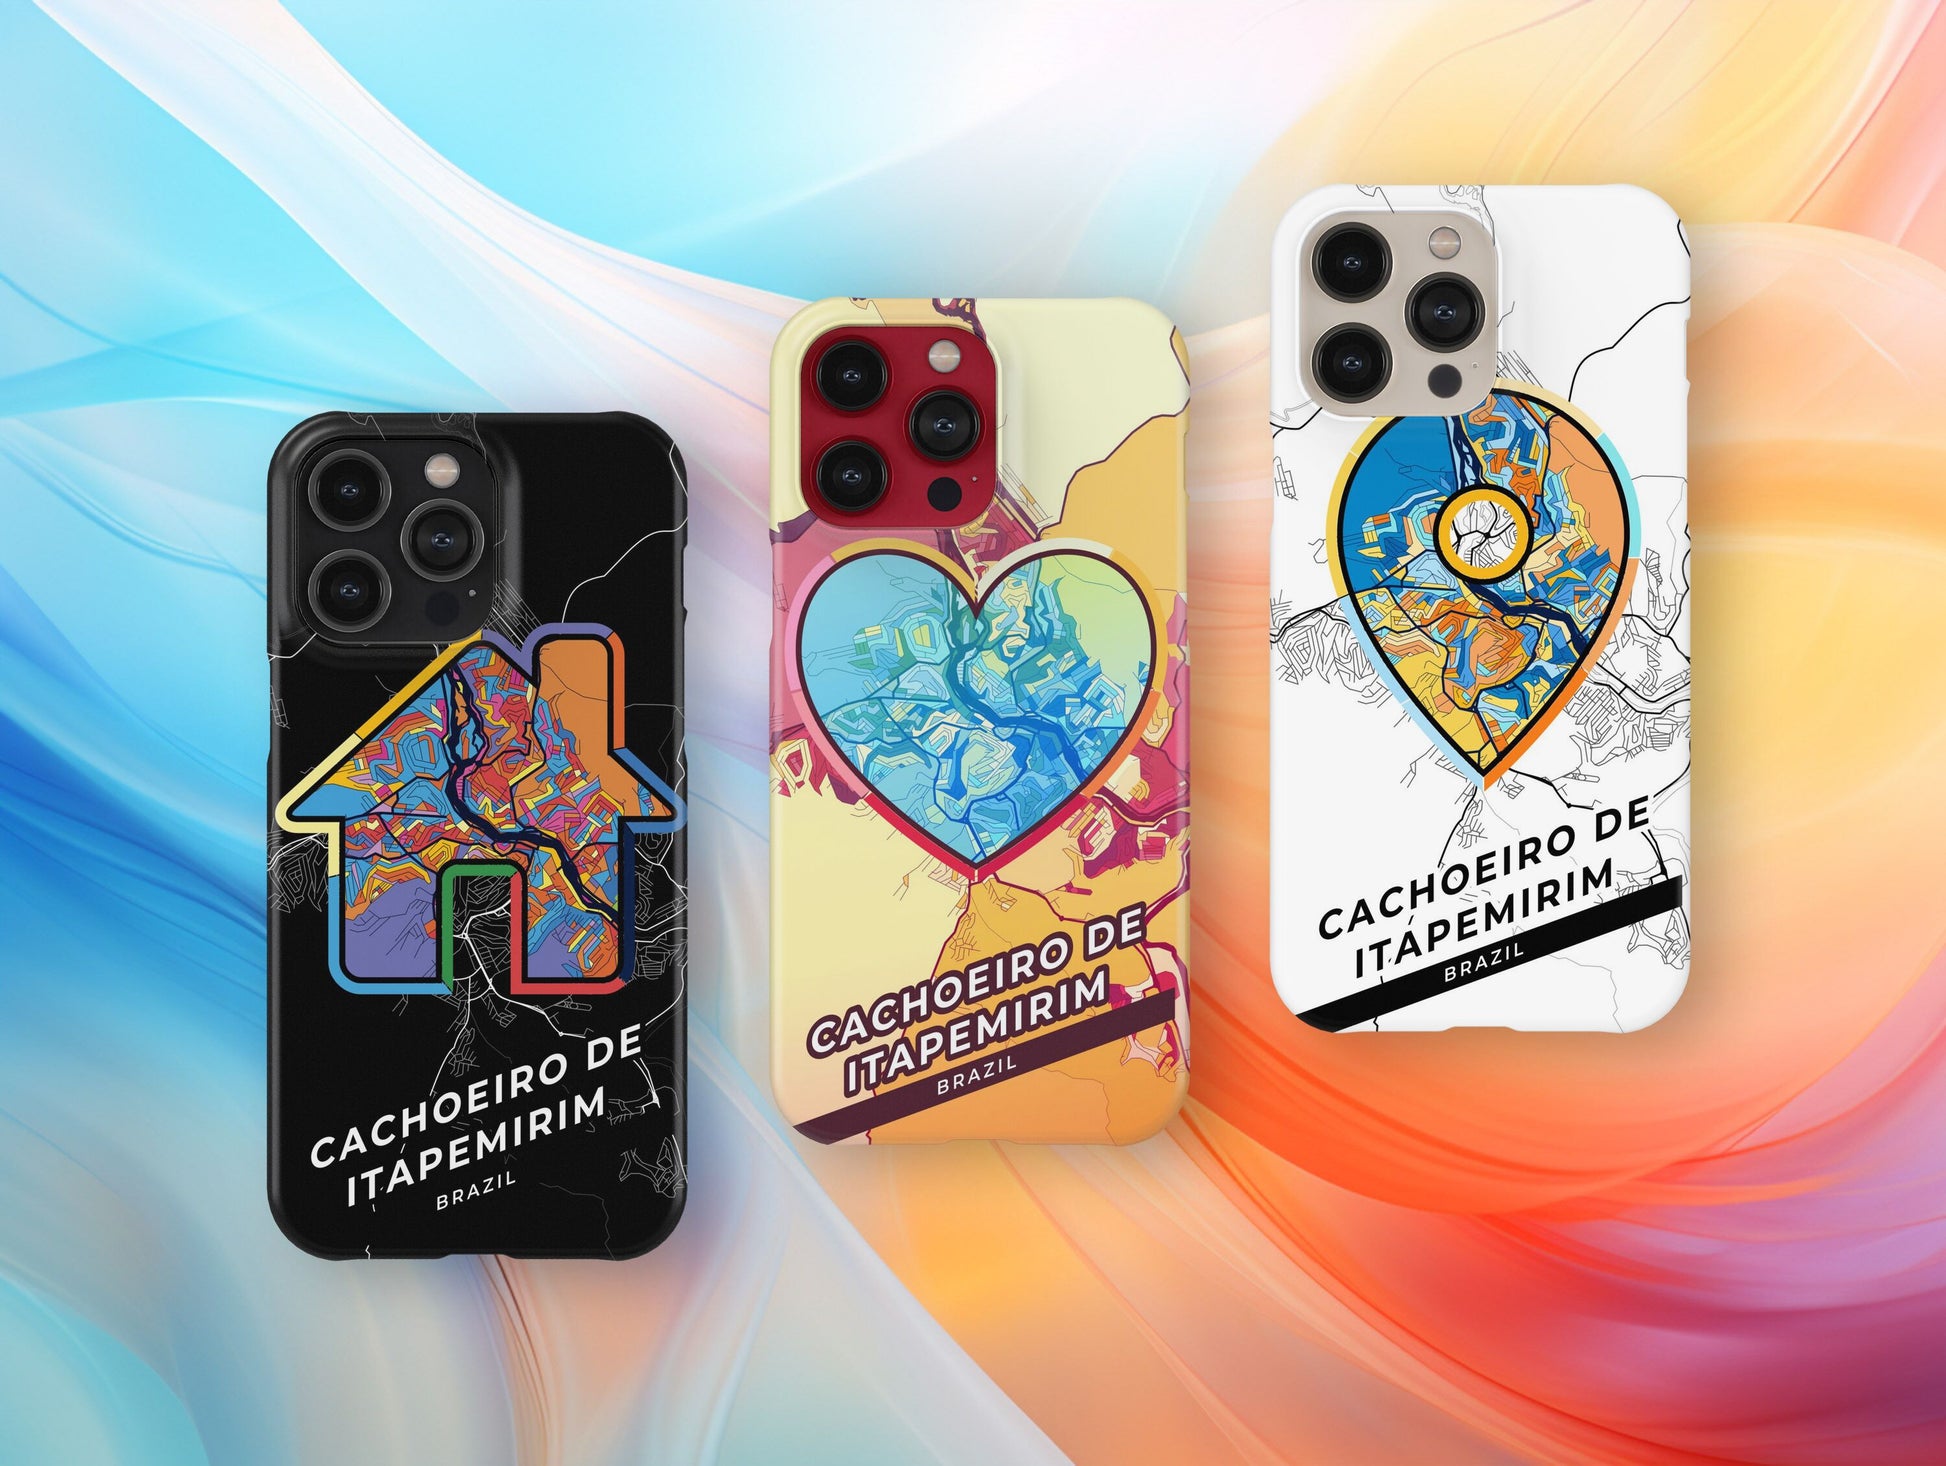 Cachoeiro De Itapemirim Brazil slim phone case with colorful icon. Birthday, wedding or housewarming gift. Couple match cases.